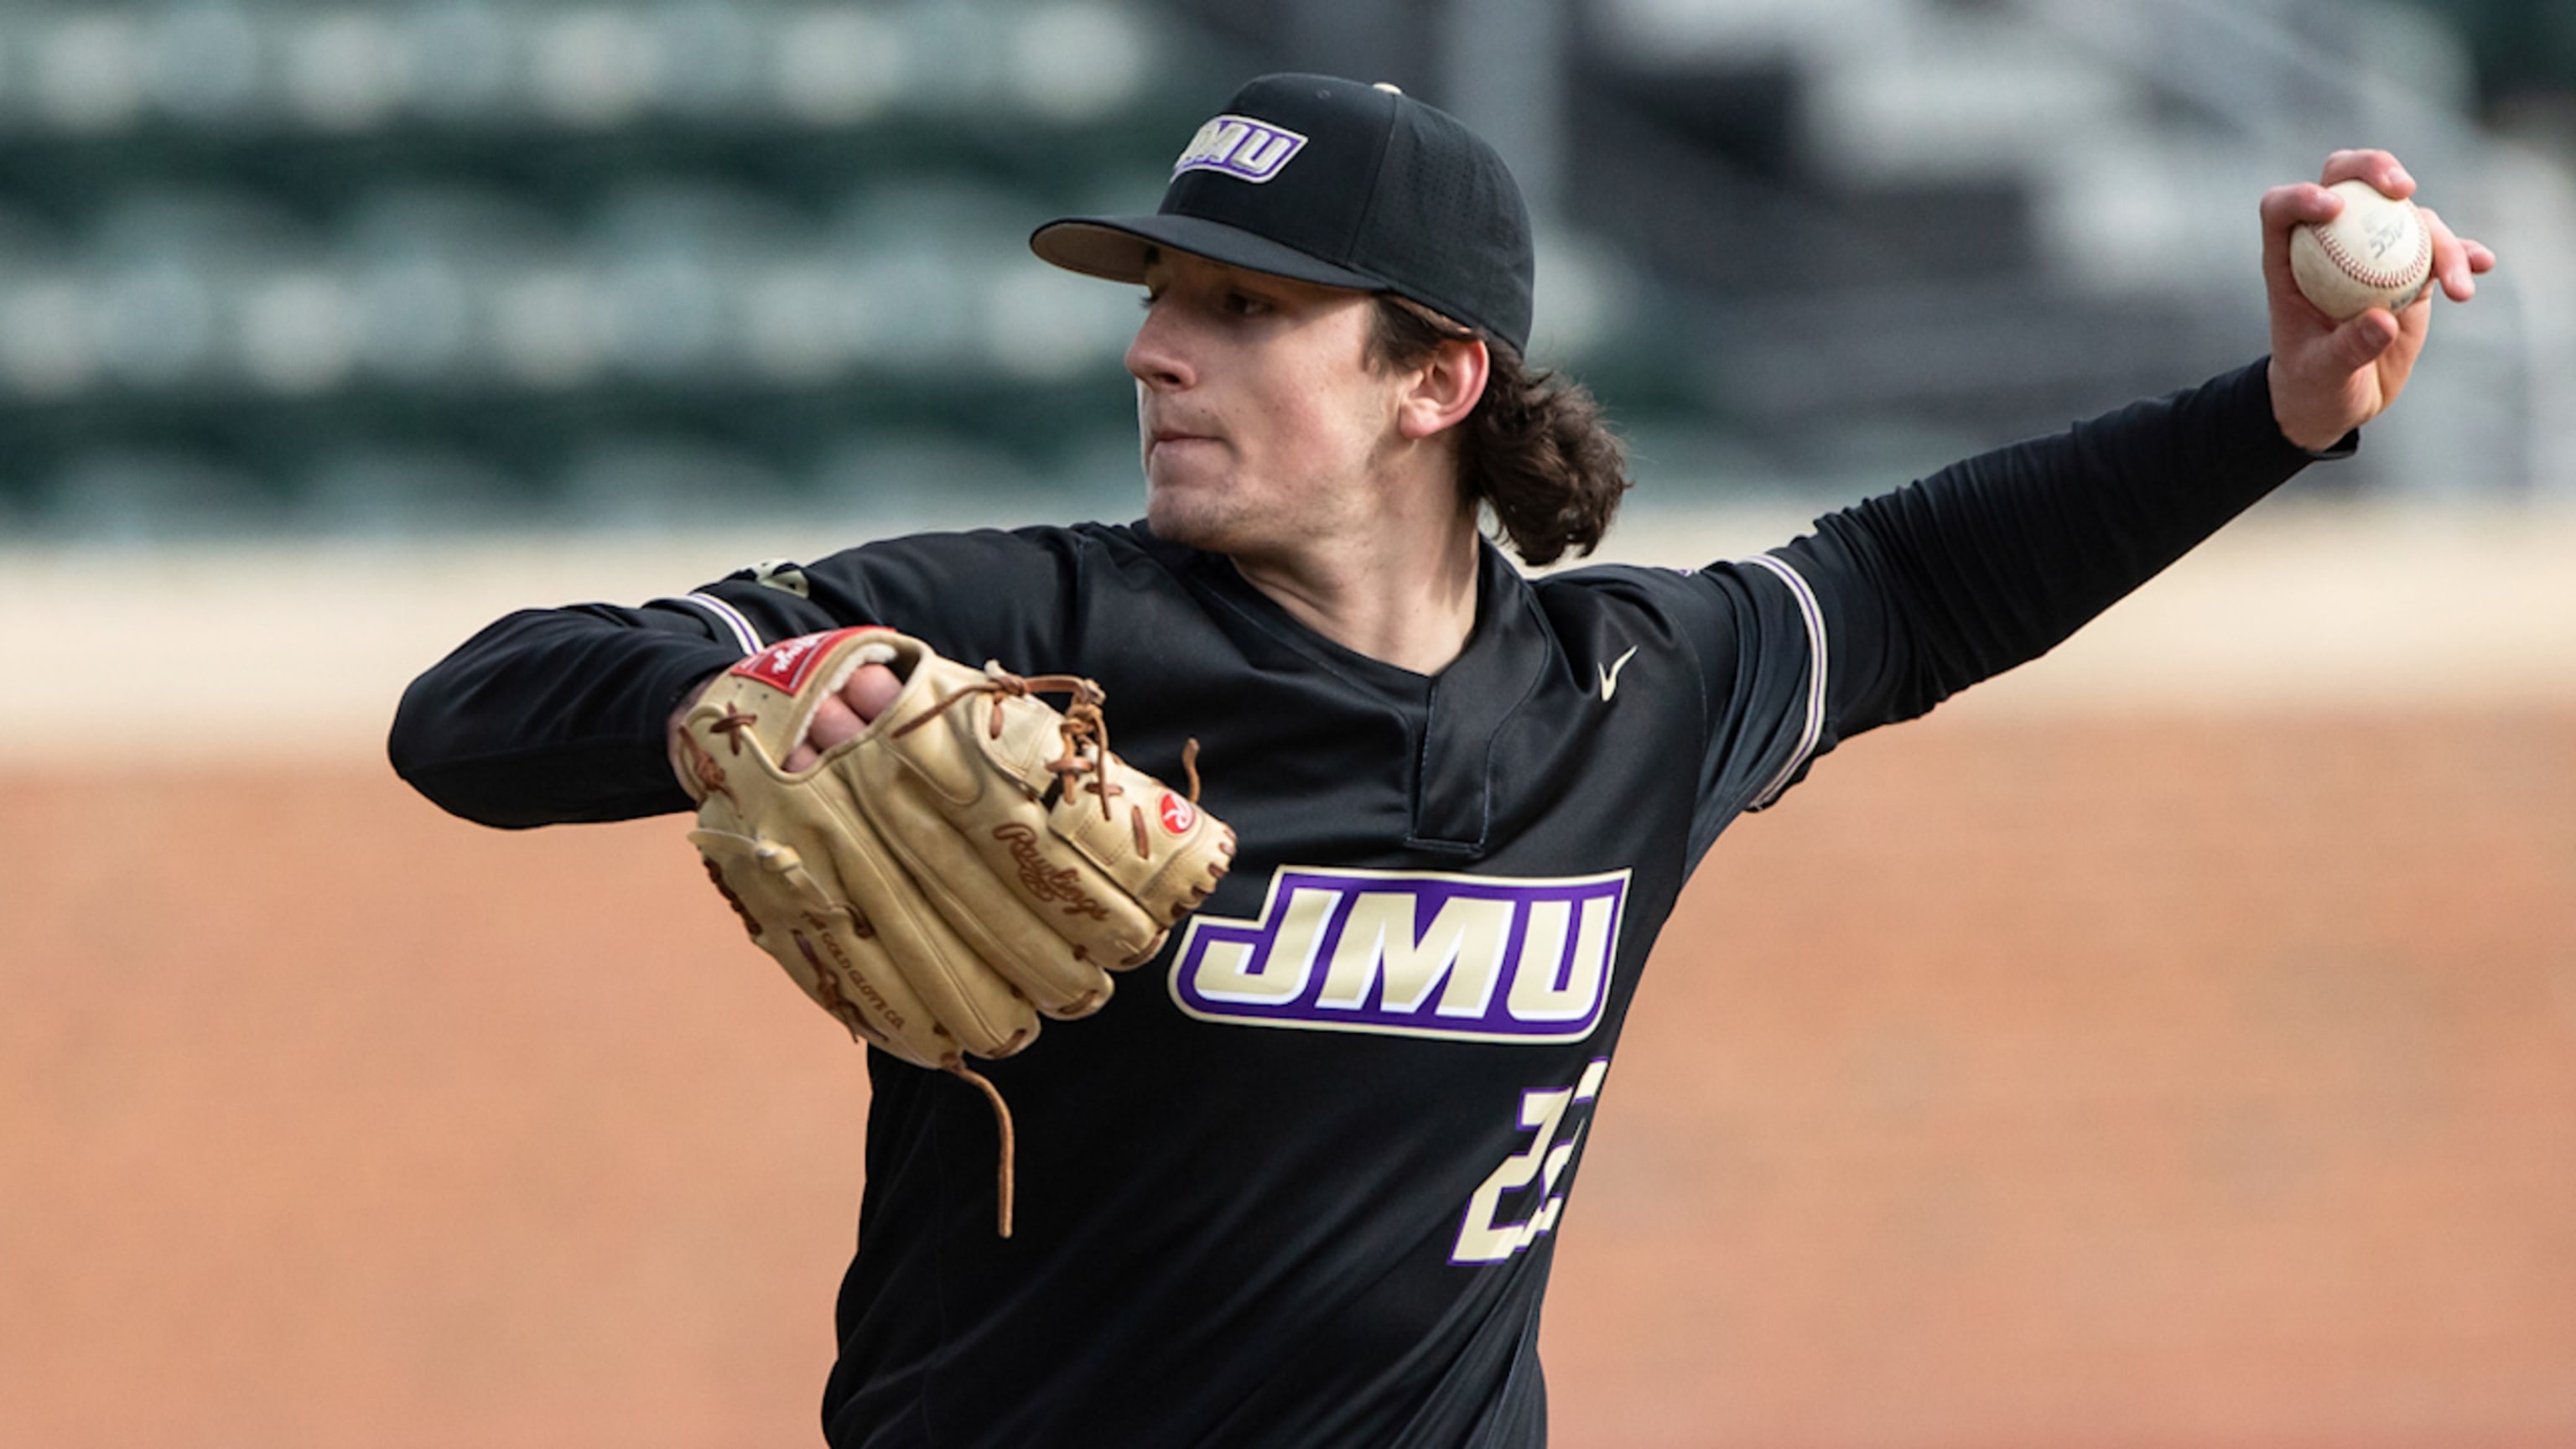 Druw Jones drafted No. 2 overall by D-backs 2022 MLB Draft